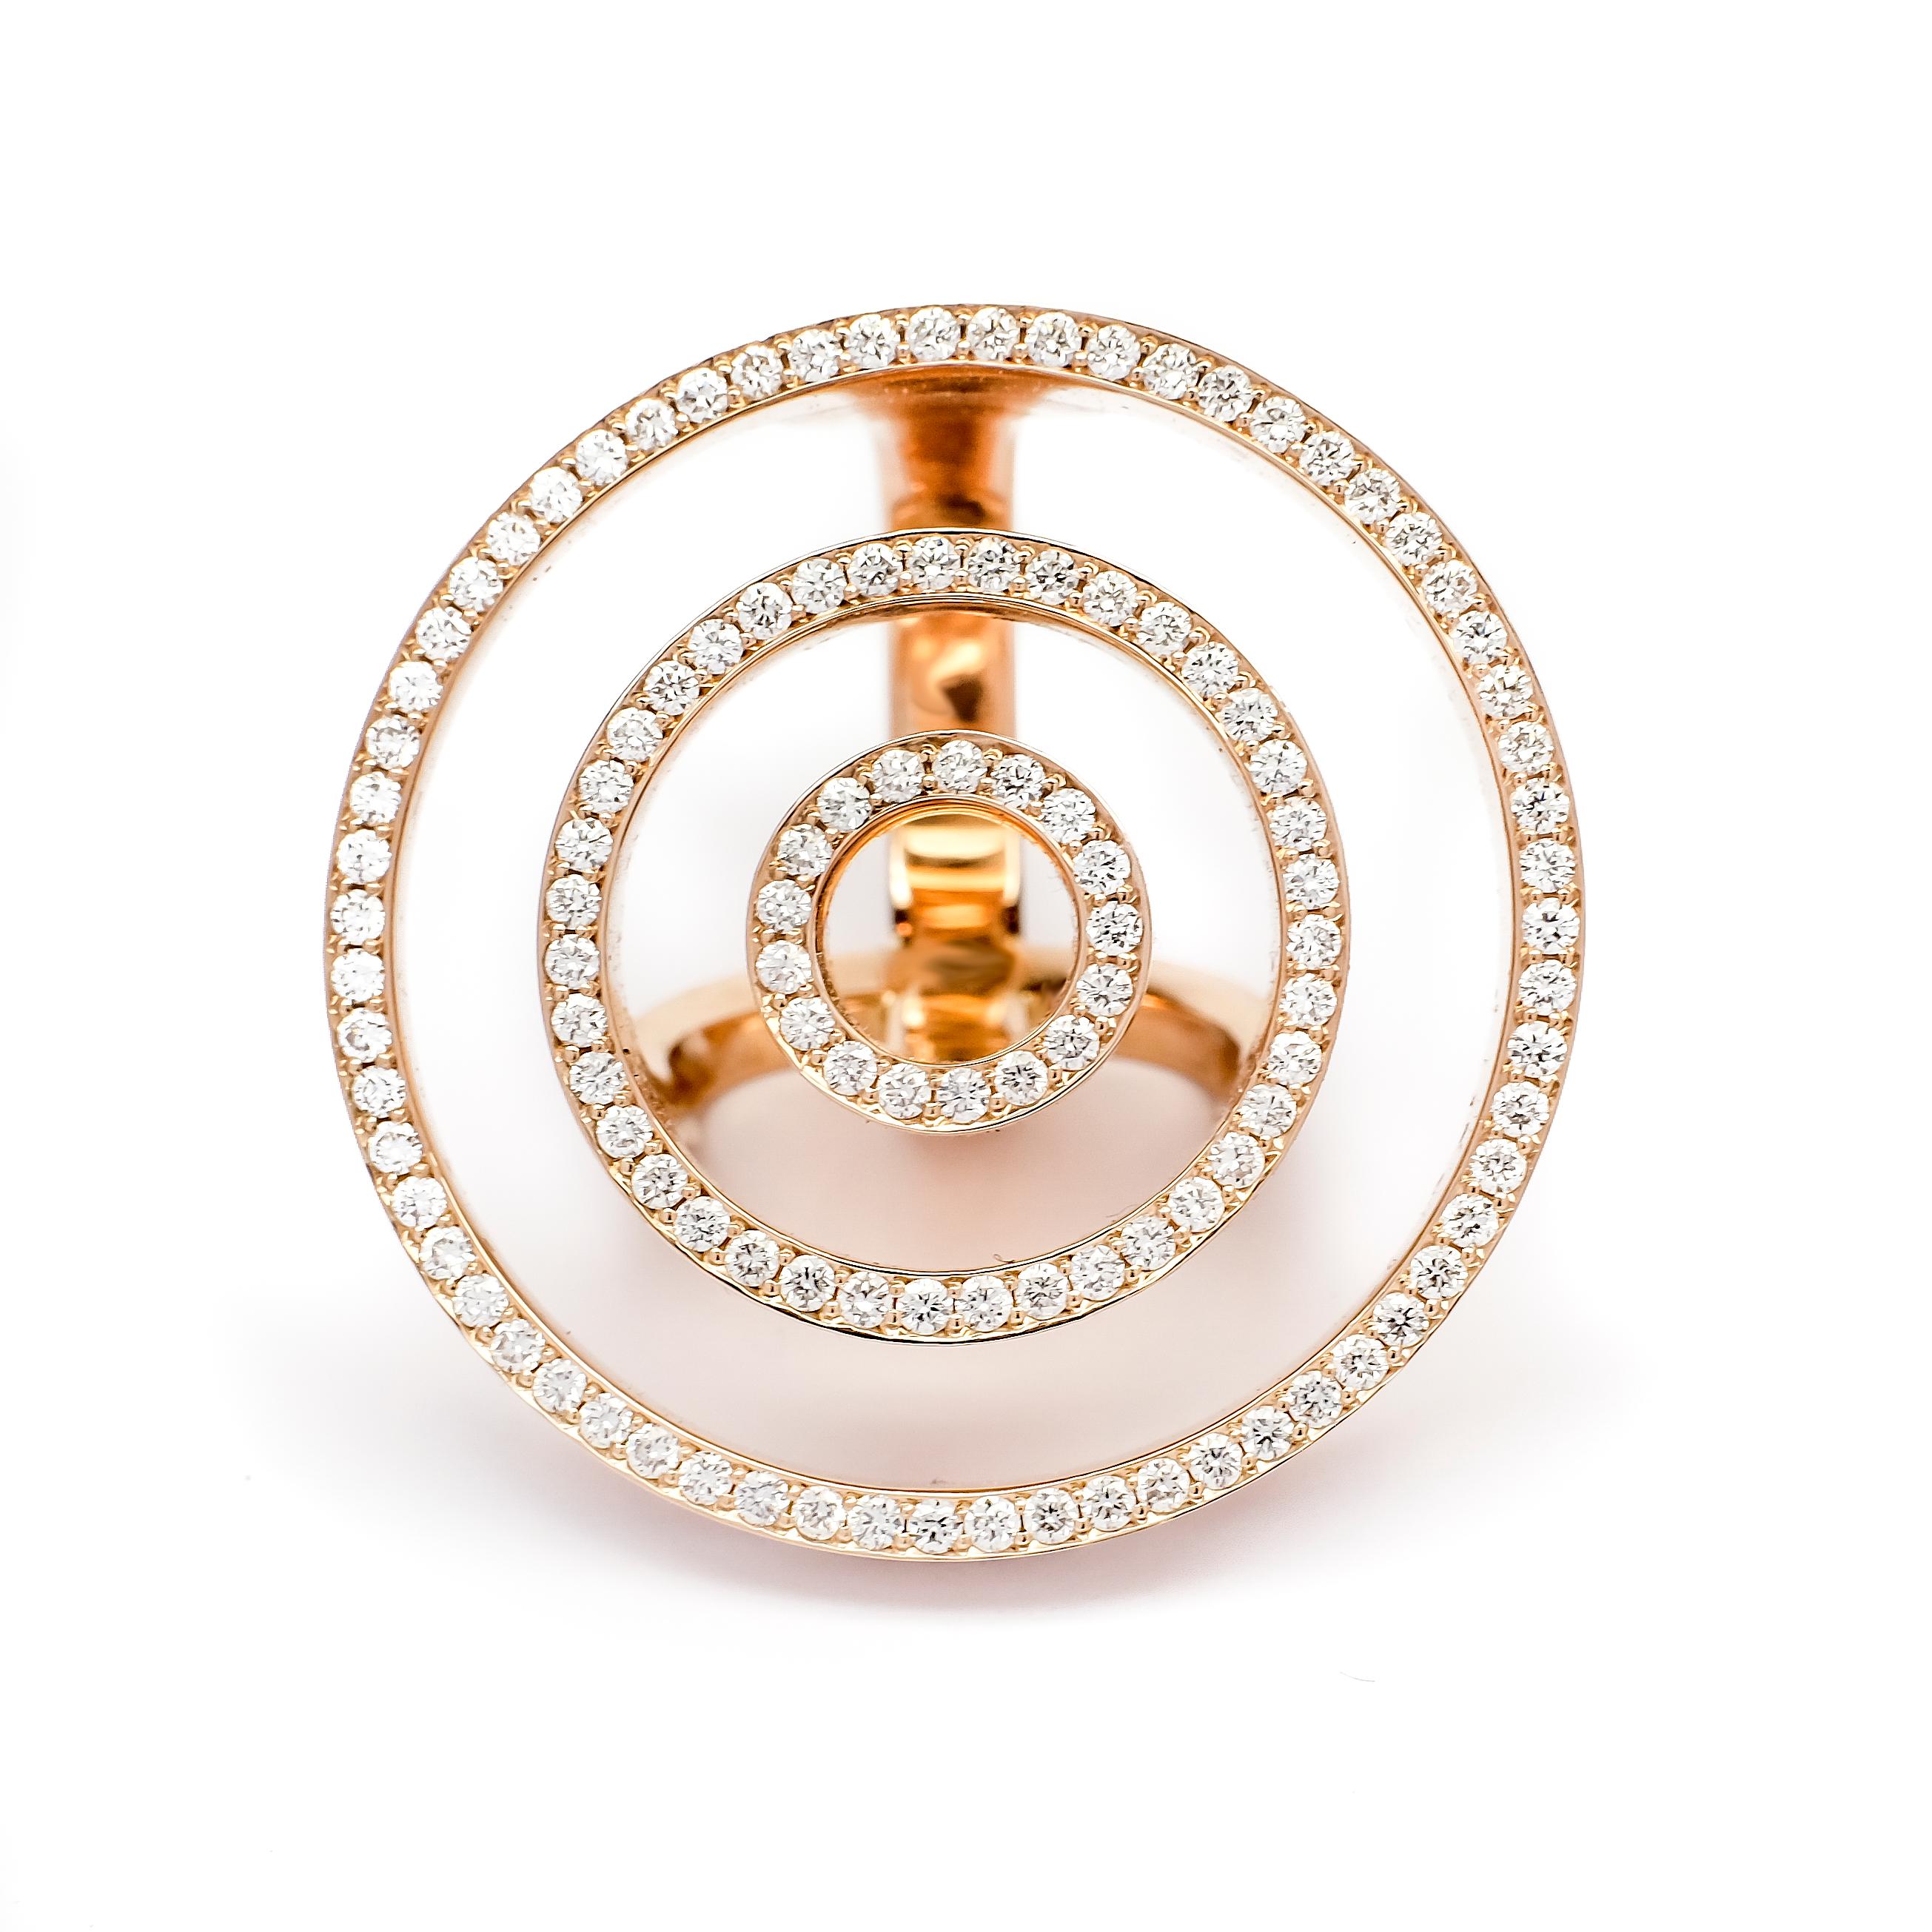 Crafted out of 14 karat rose gold this ring has a total of 0.89ct of top white vvs diamonds.
With this contemporary design Frohmann seeks to bring out the magic of jewelry by giving the illusion that the 3 circles are floating over the finger with